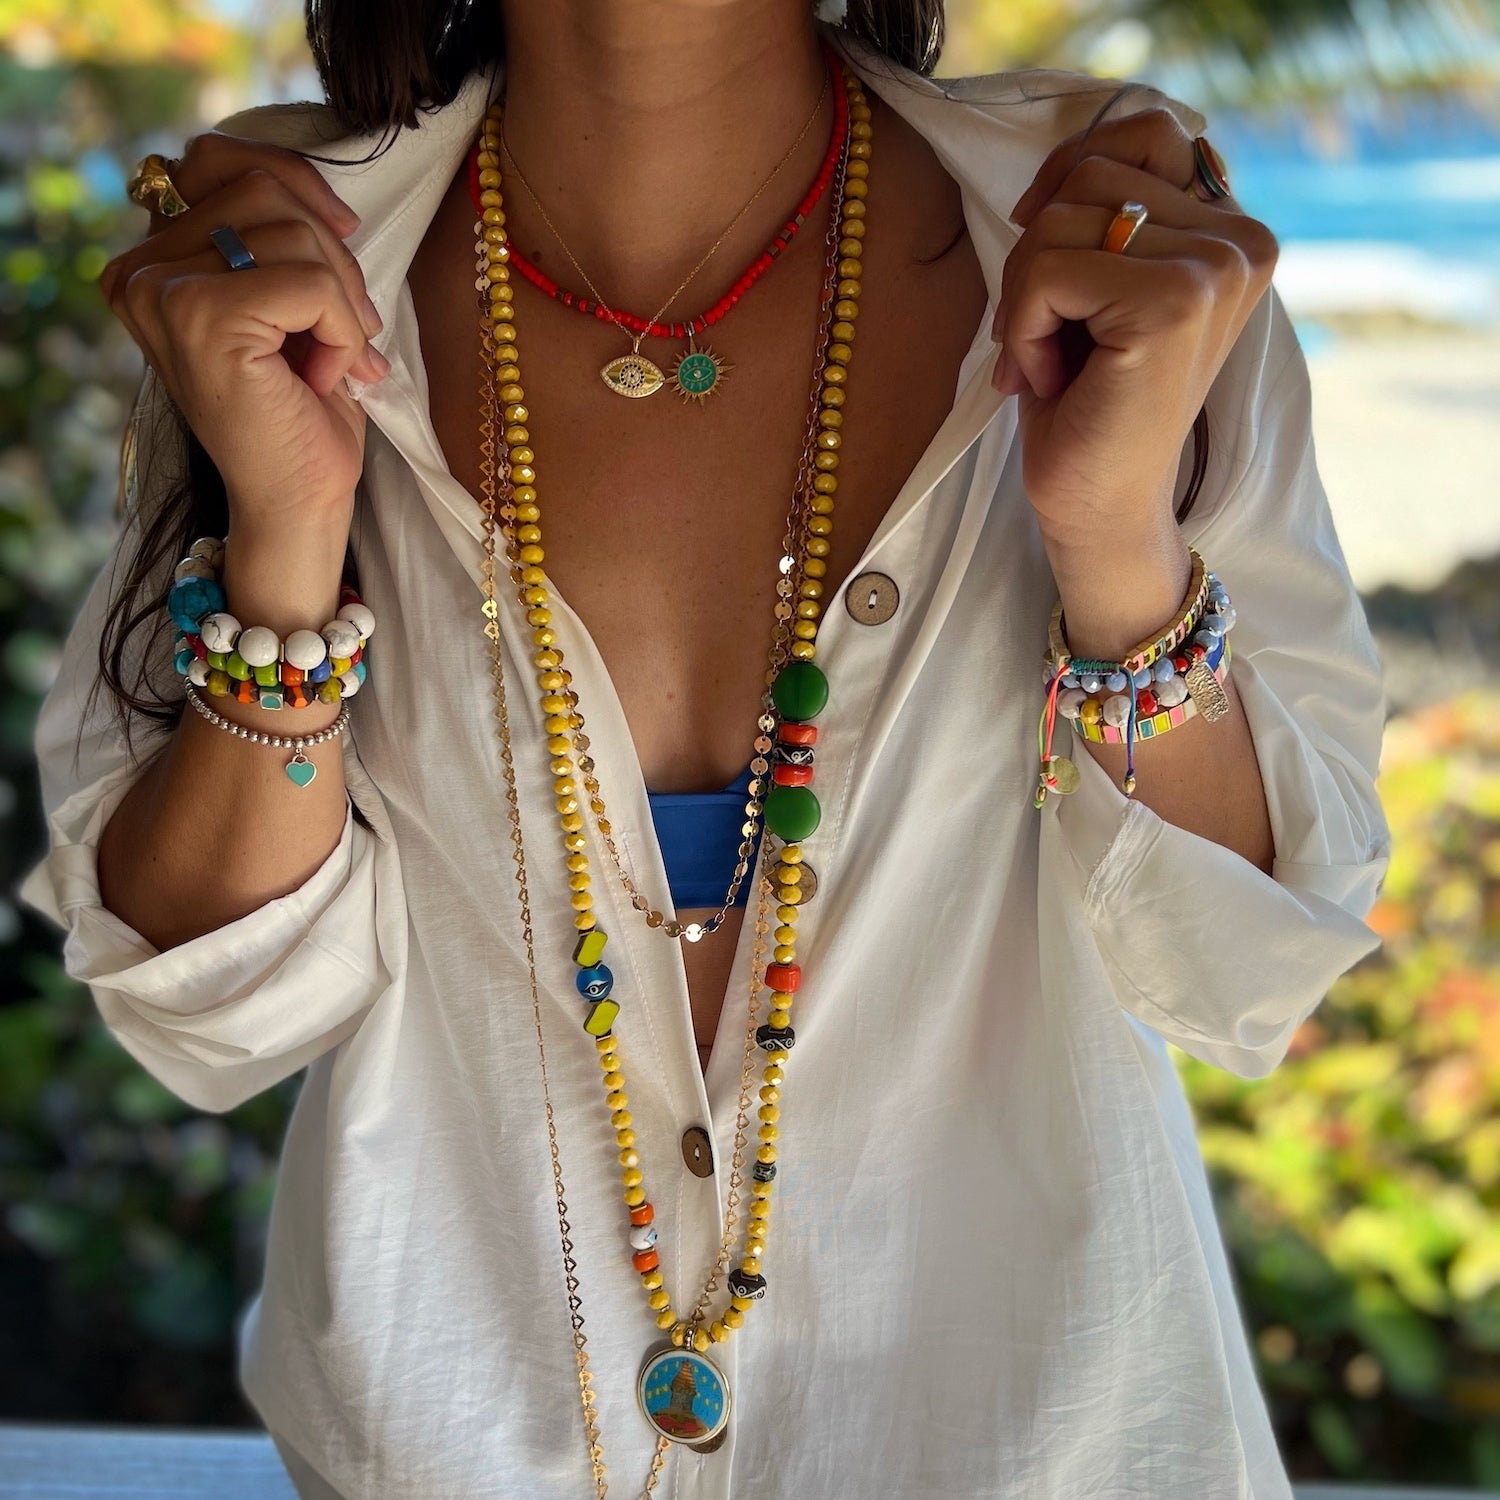 The model exudes positive energy while wearing the Yoga Serenity Necklace, a perfect match for their yoga practice.